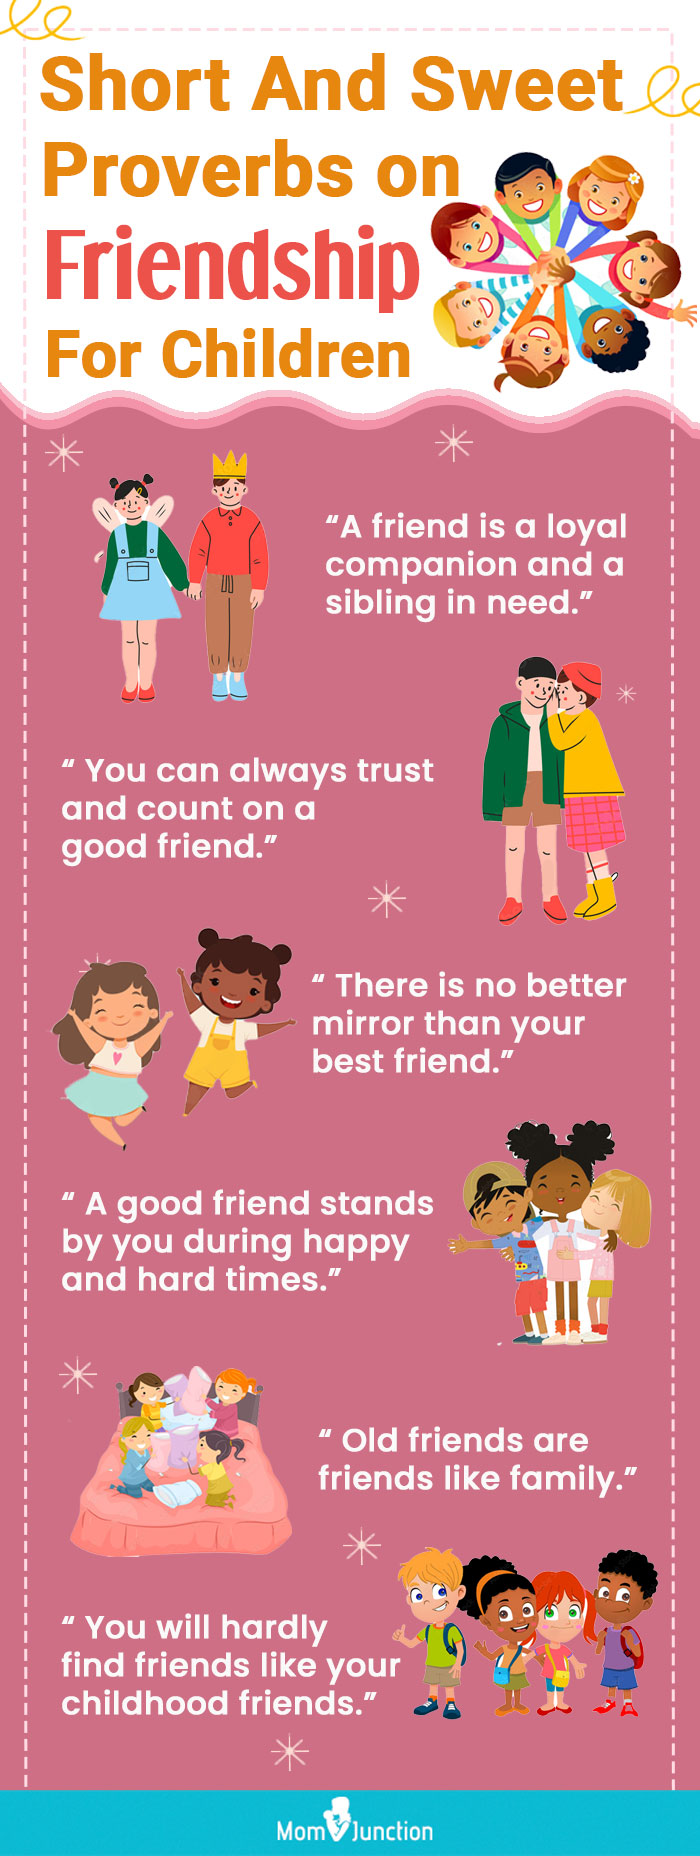 sayings on friendship for children [infographic]